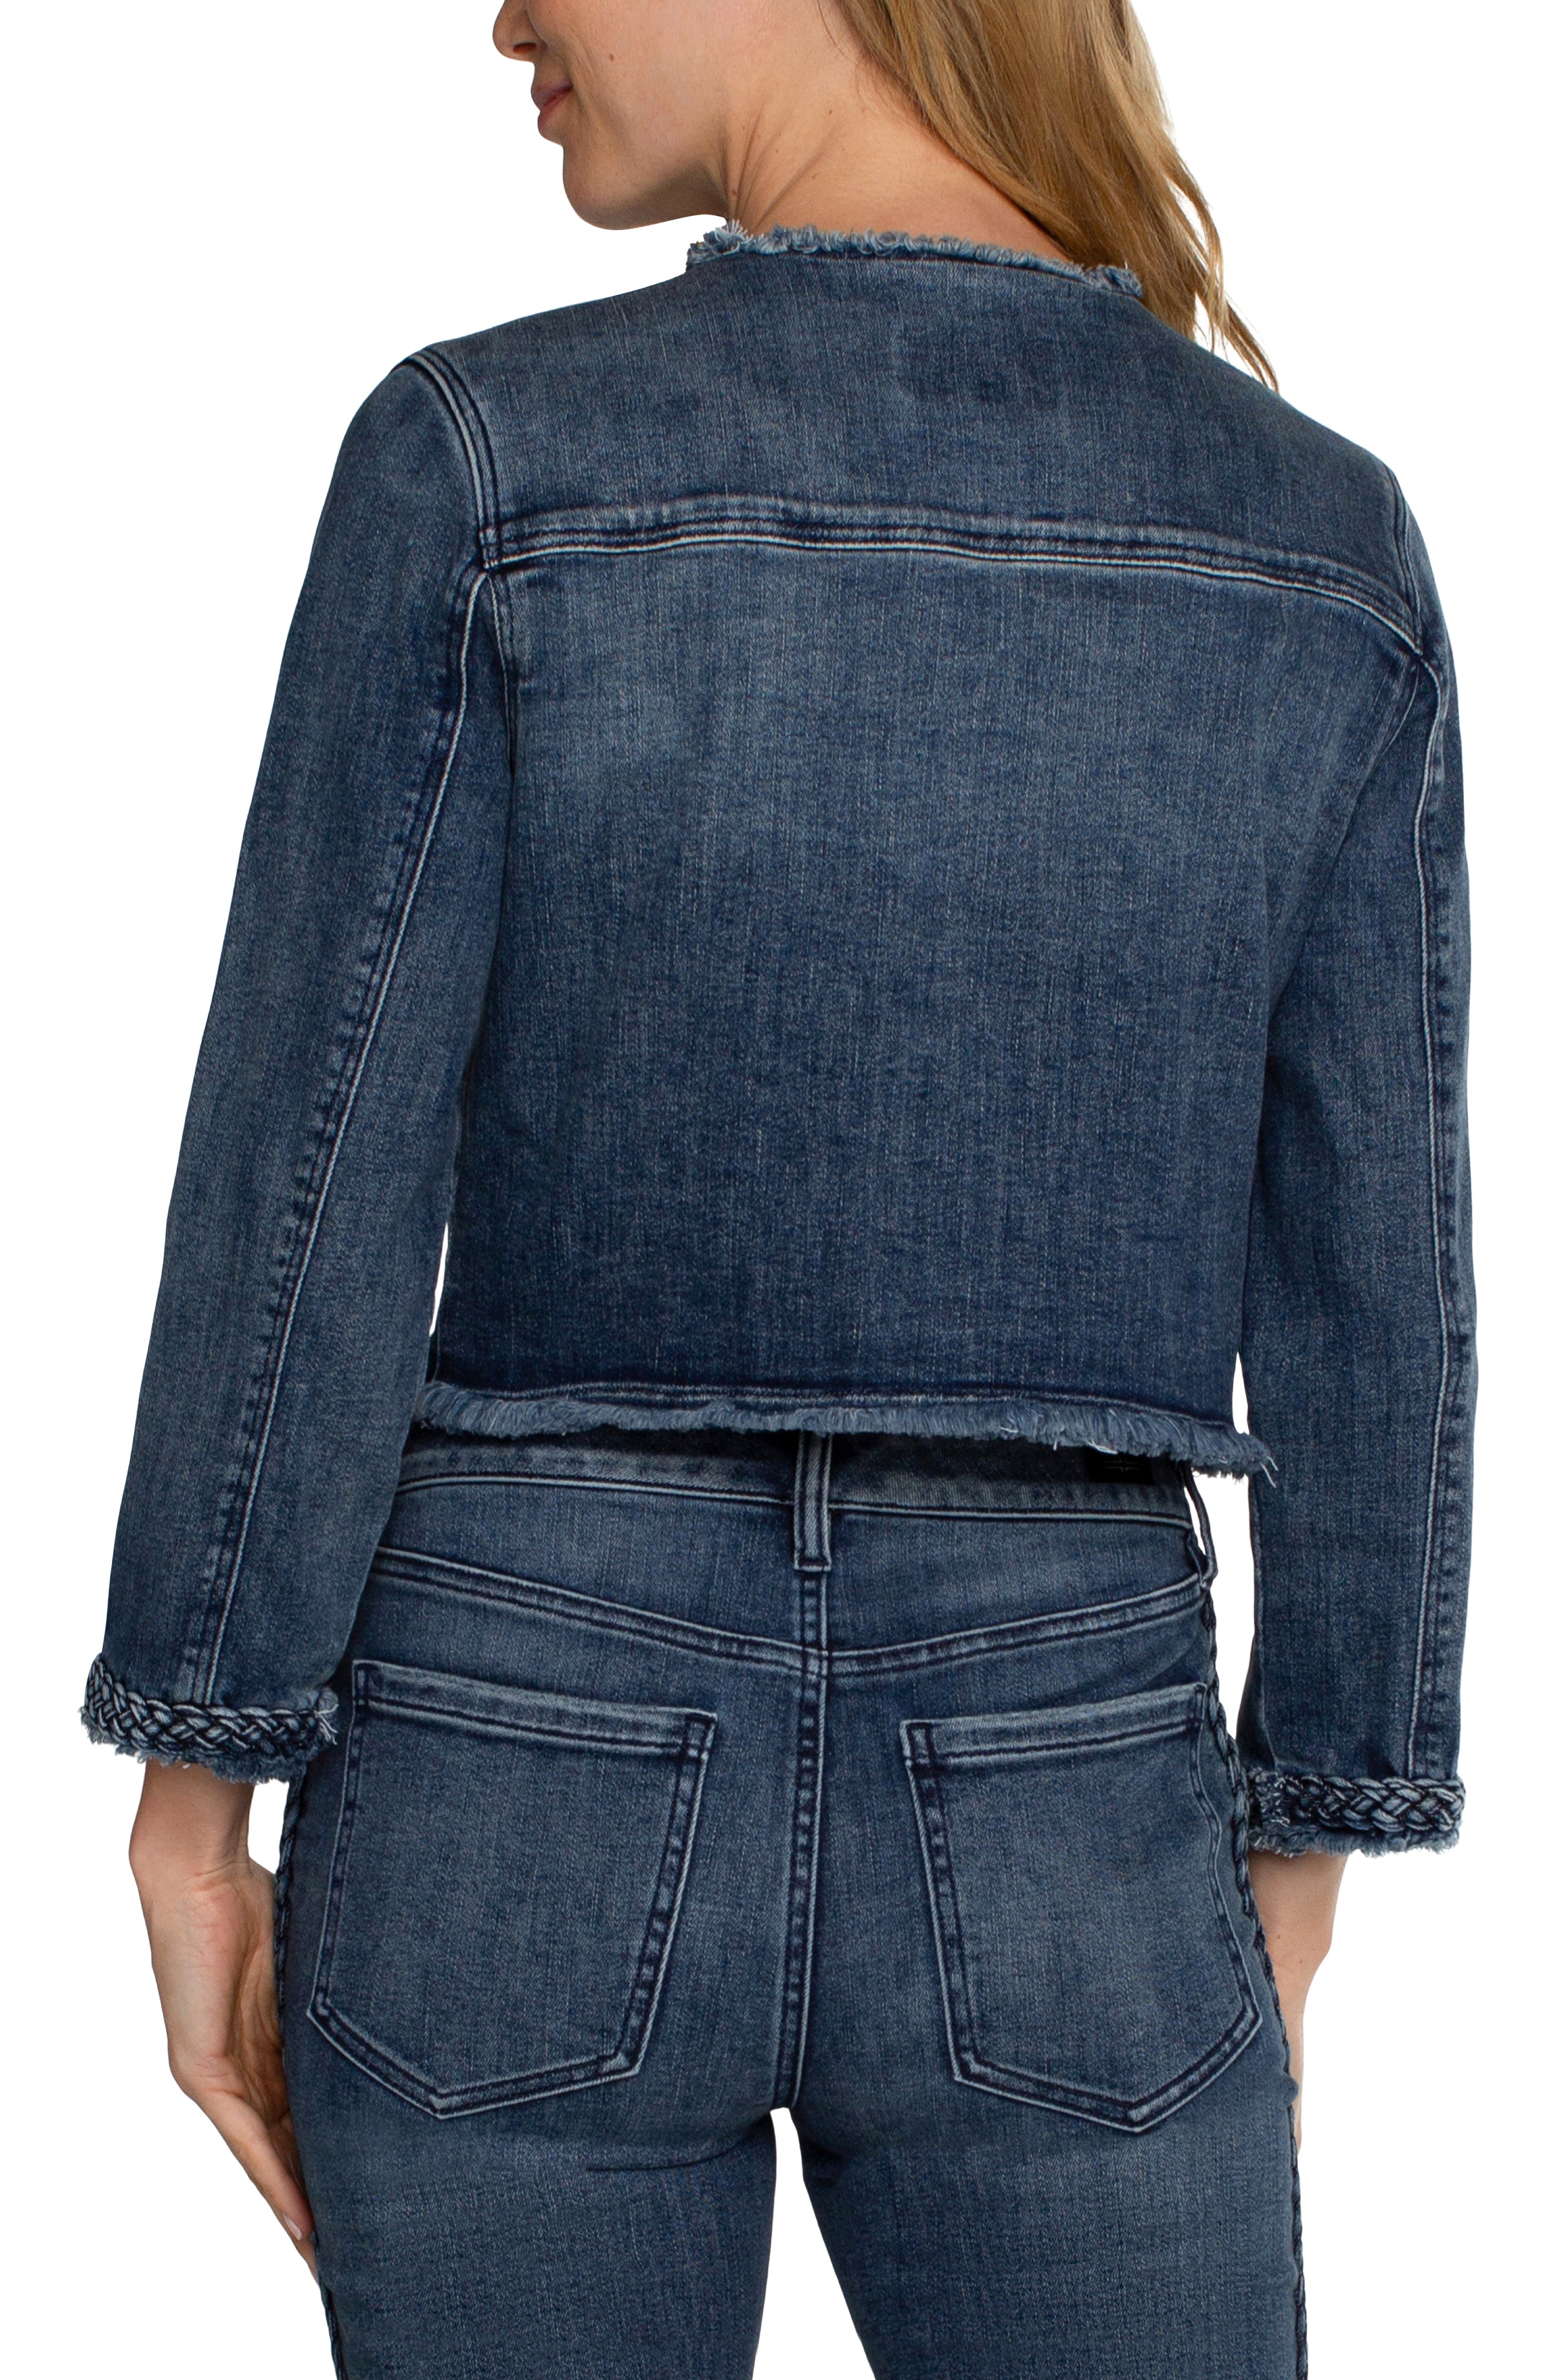 LVP Cropped Jean Jacket with Braid Detail - Ponderay Back View